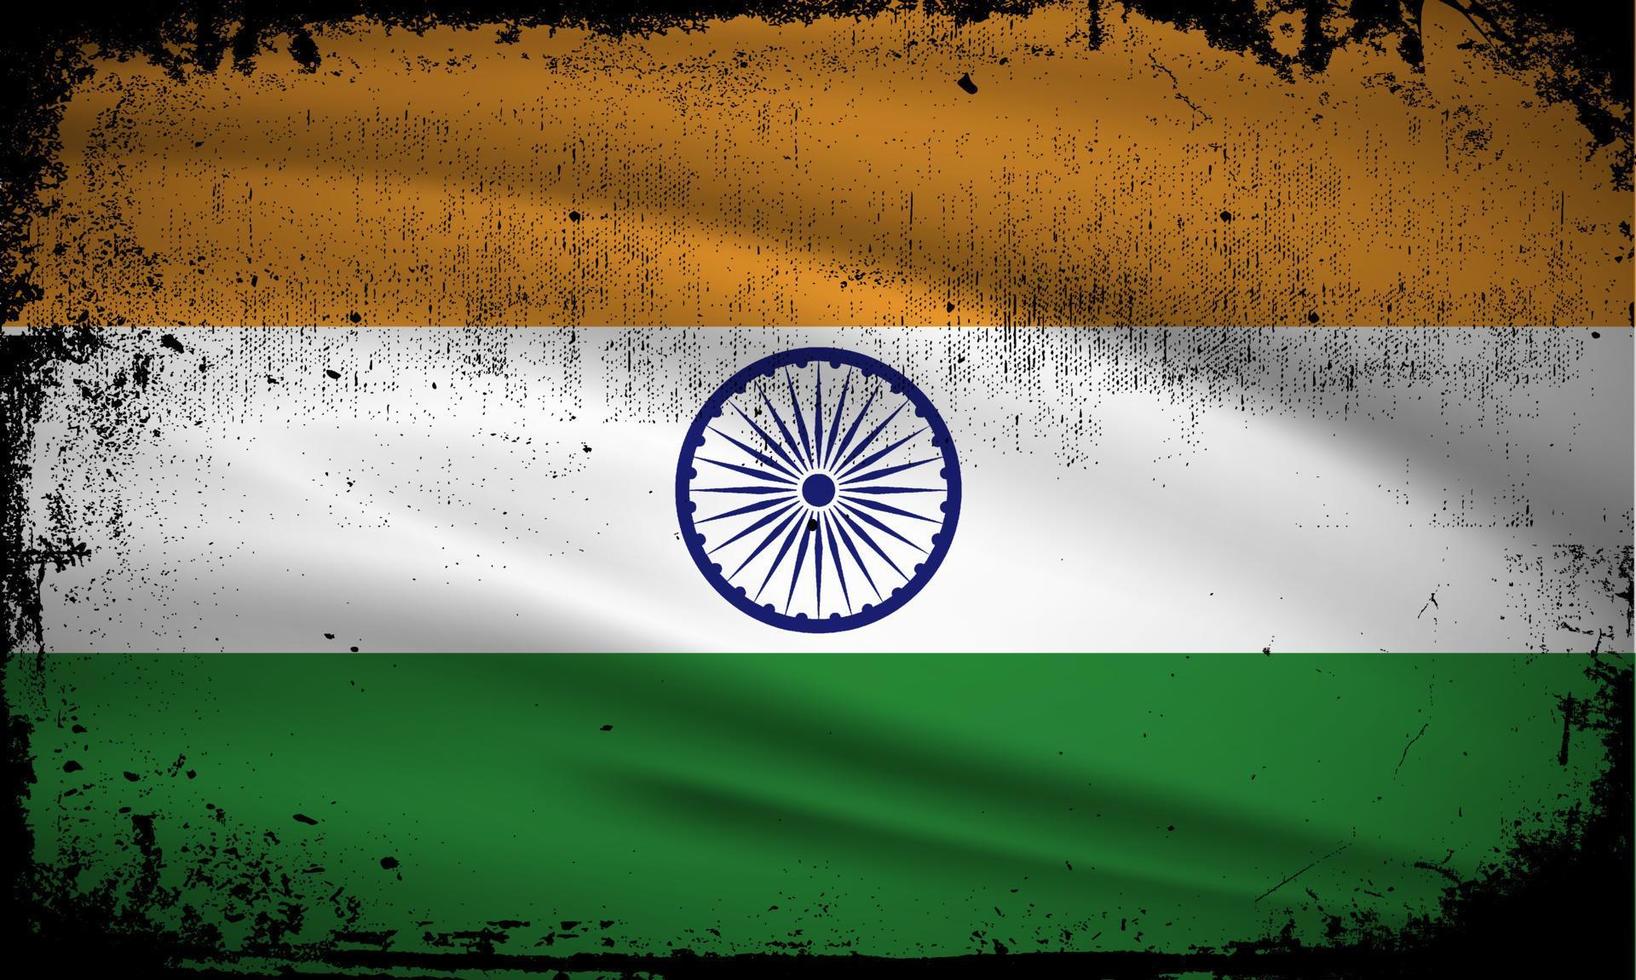 New Abstract India flag background vector with grunge stroke style. India Independence Day Vector Illustration.